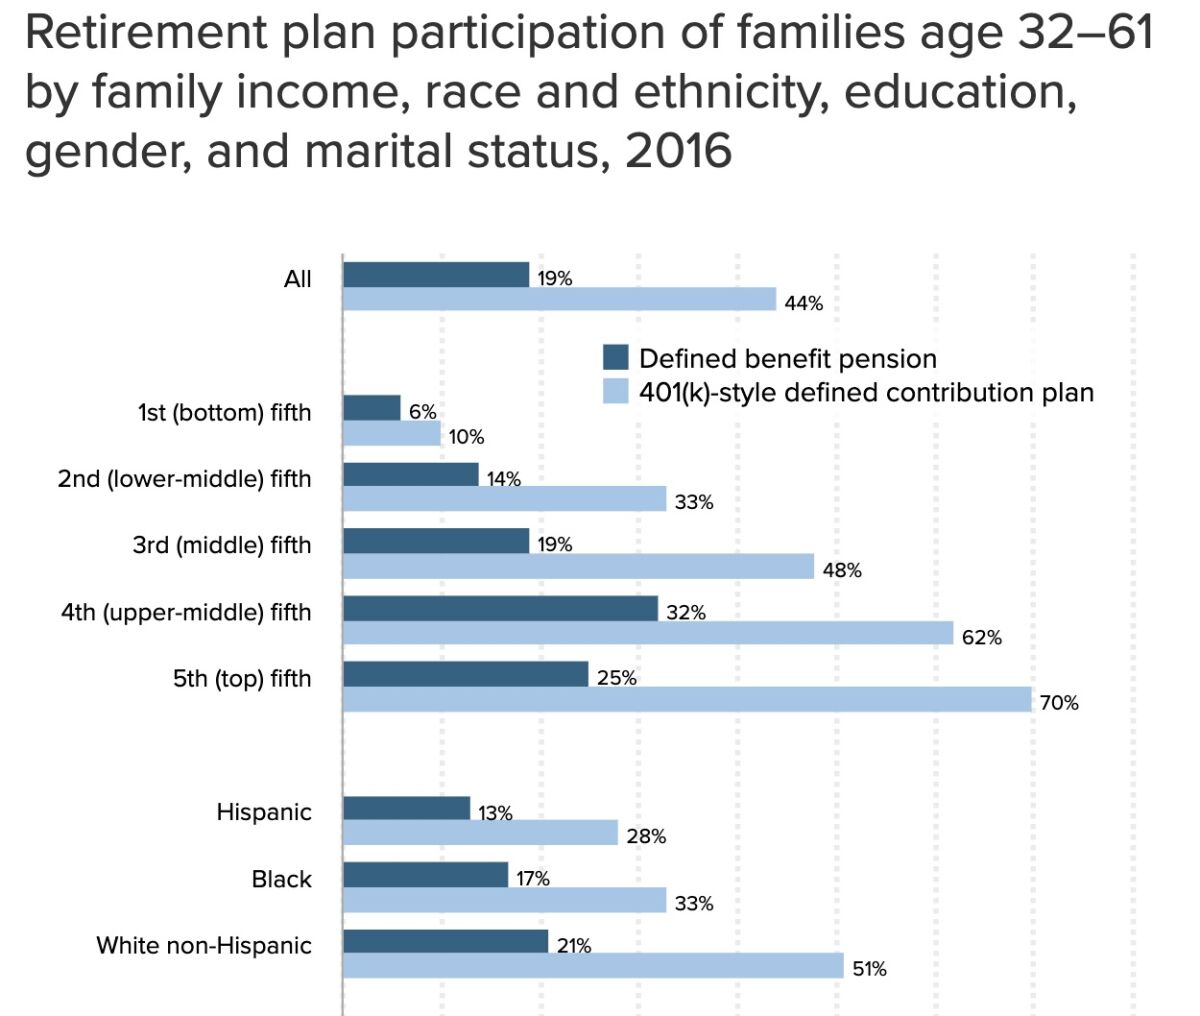 Participation in 401(k) plans is heavily skewed toward higher-income and white workers. About 70% of the top fifth of income earners participate, but only 10% of the bottom fifth; 51% of white workers participate but only 33% of black workers and 28% of Latinos. Participation in traditional defined benefit pensions is more equal, though not free of inequality.